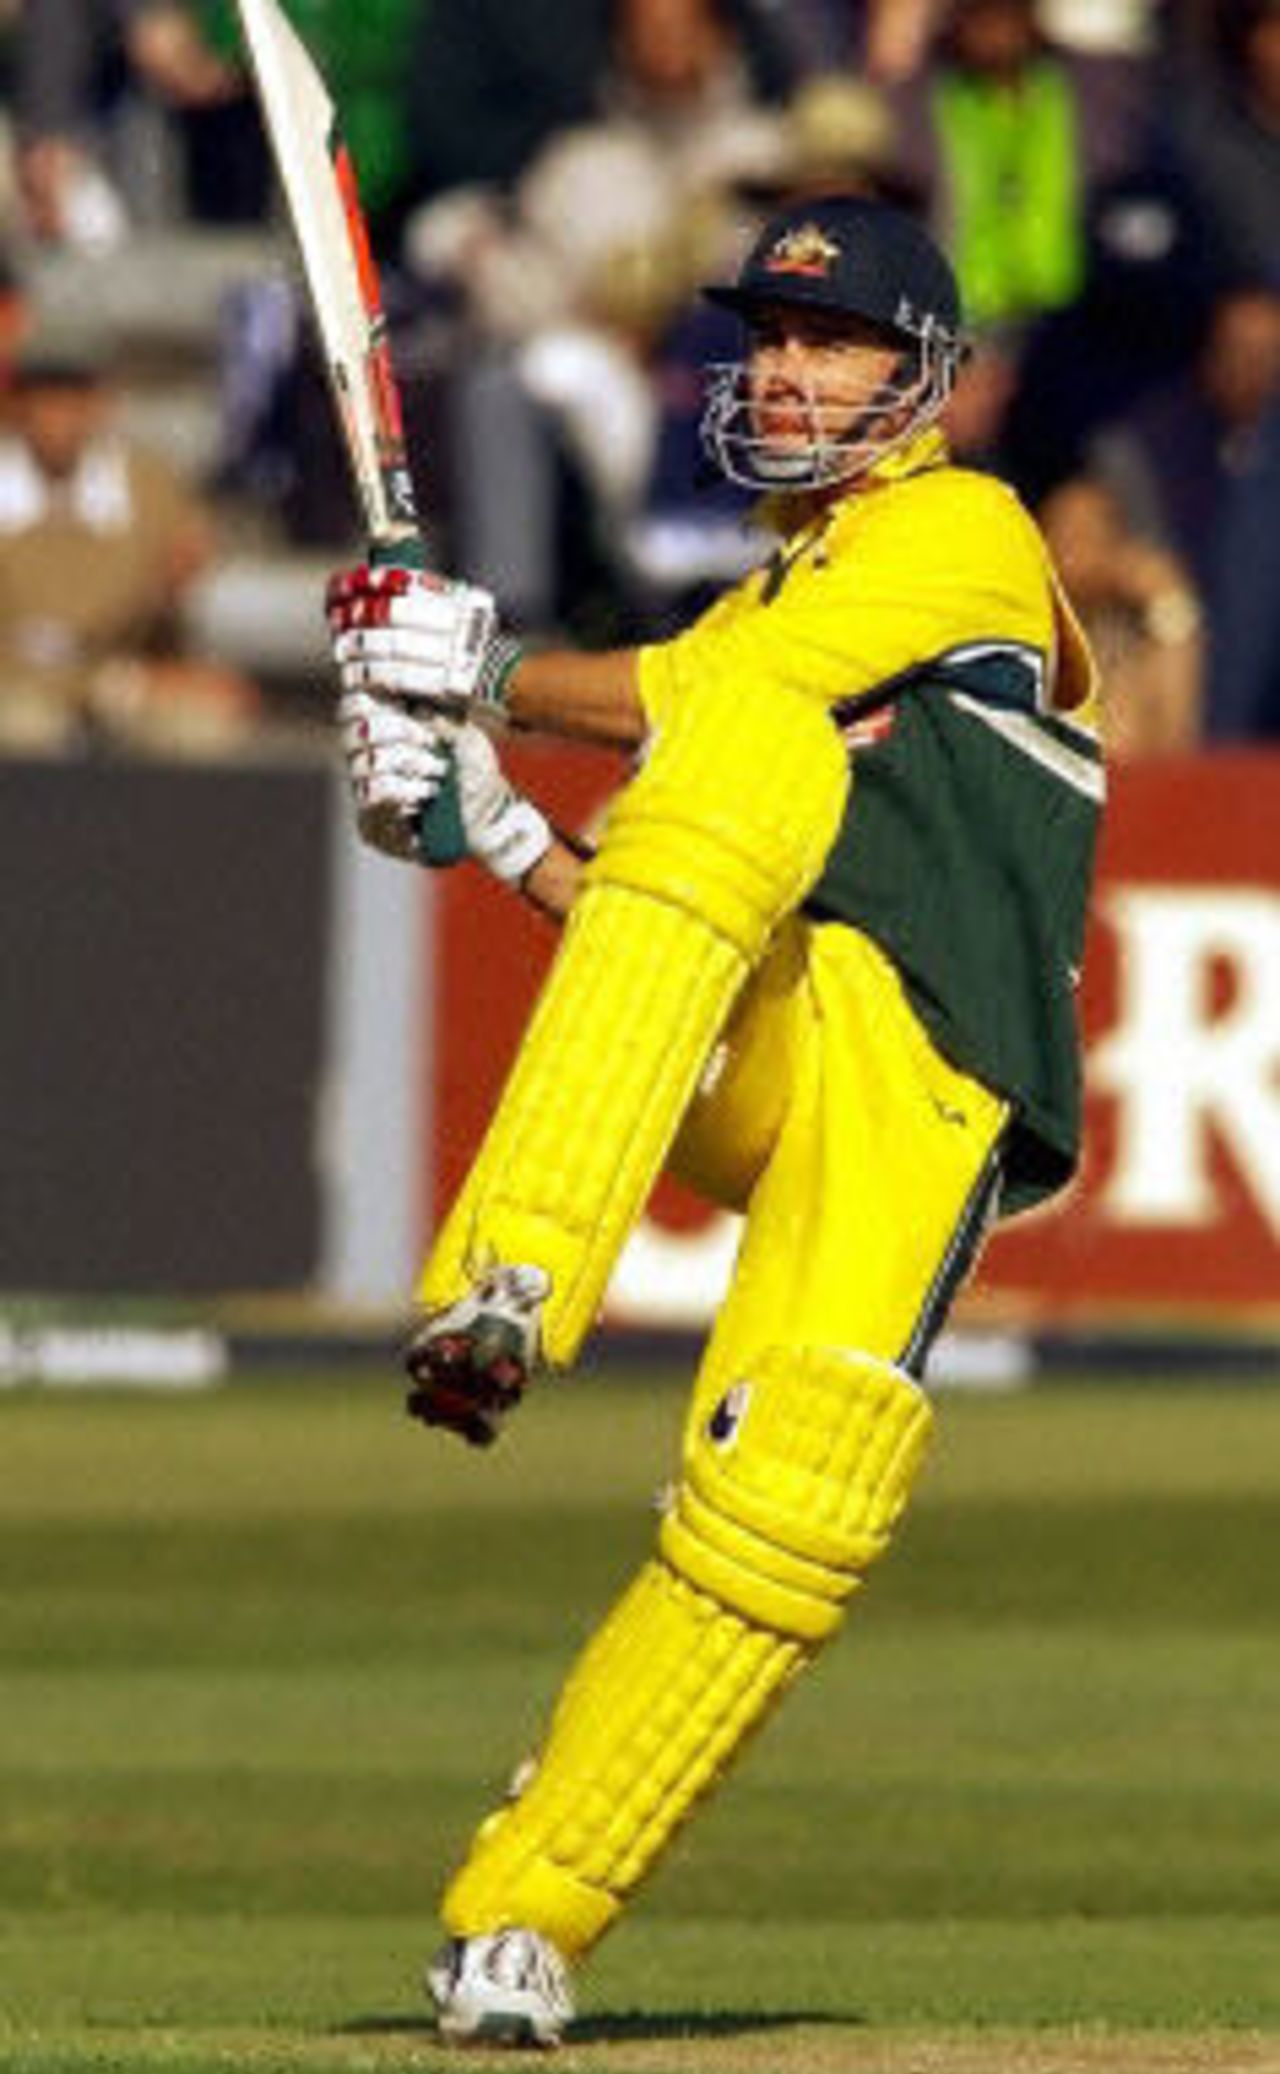 Michael Bevan hooks a ball to the boundary, 2nd ODI at Cardiff, 9 June 2001.